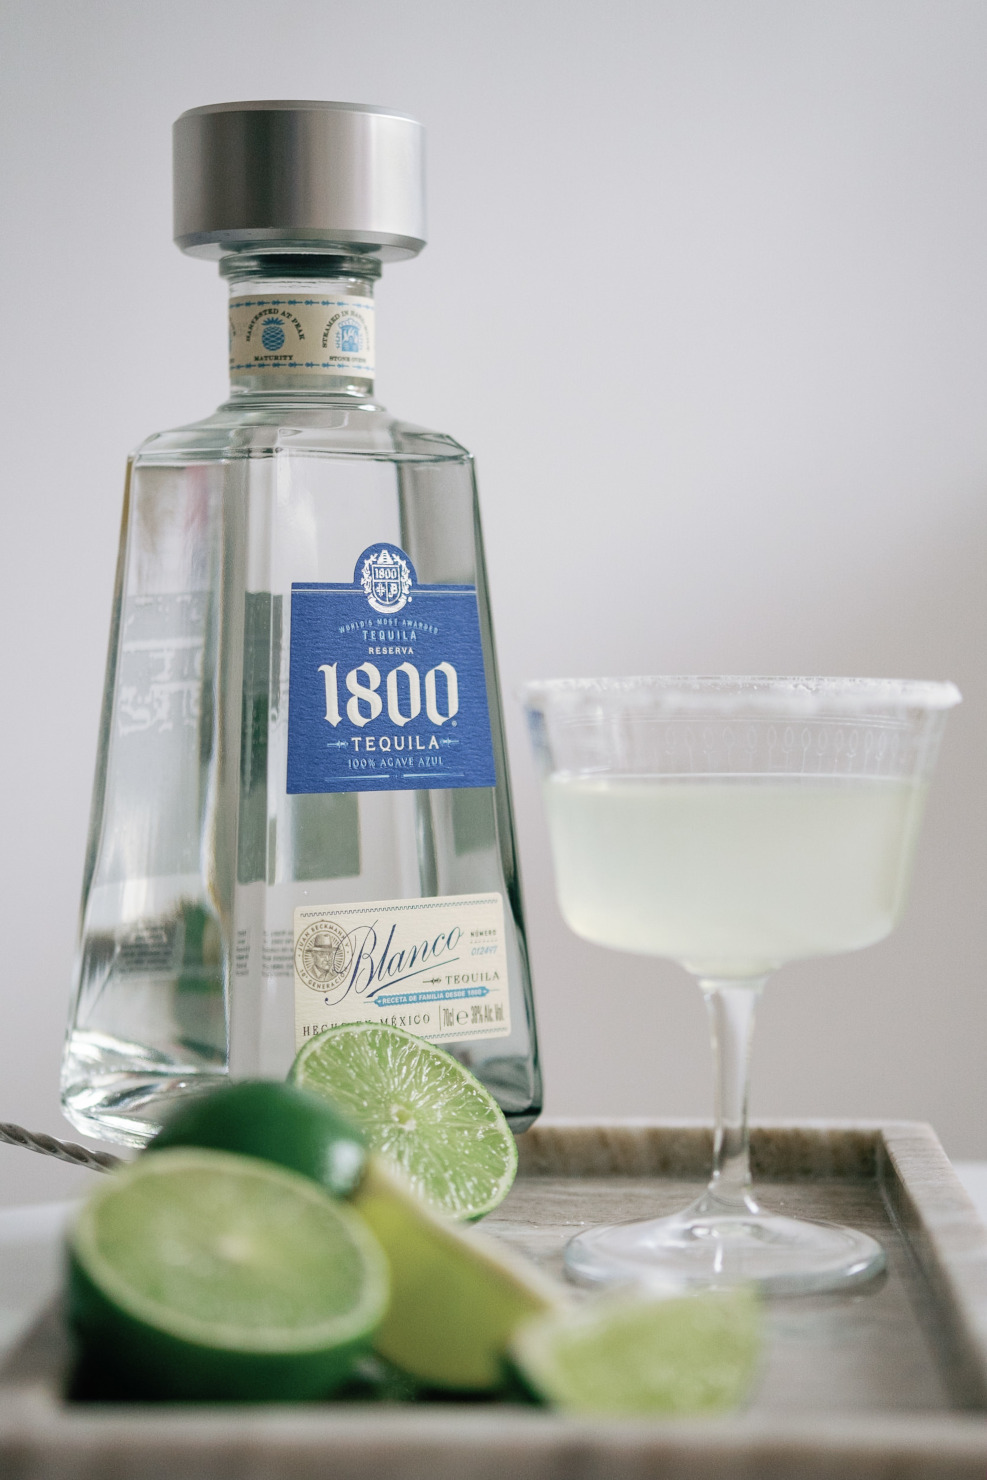 1800 tequila